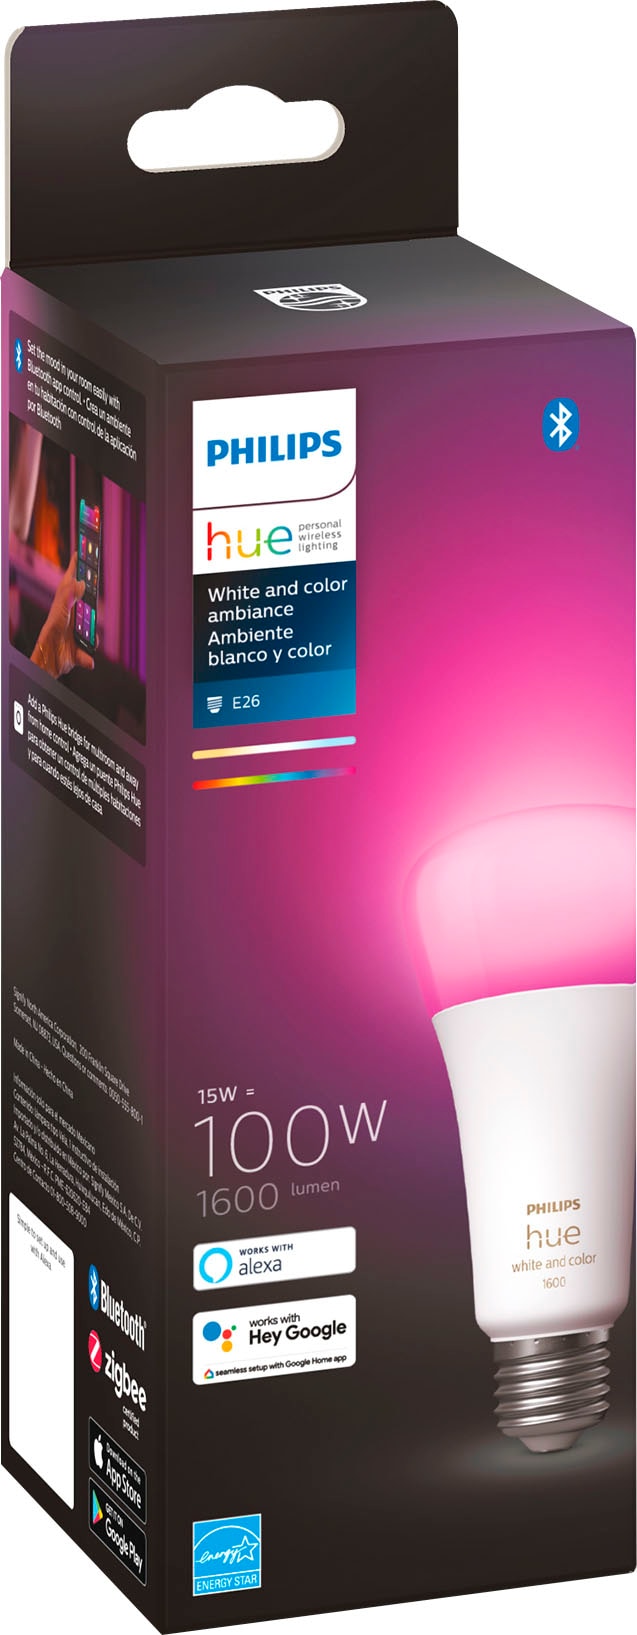 Philips - Hue White and Color Ambiance 100W A21 LED Smart Bulb - Multicolor_7